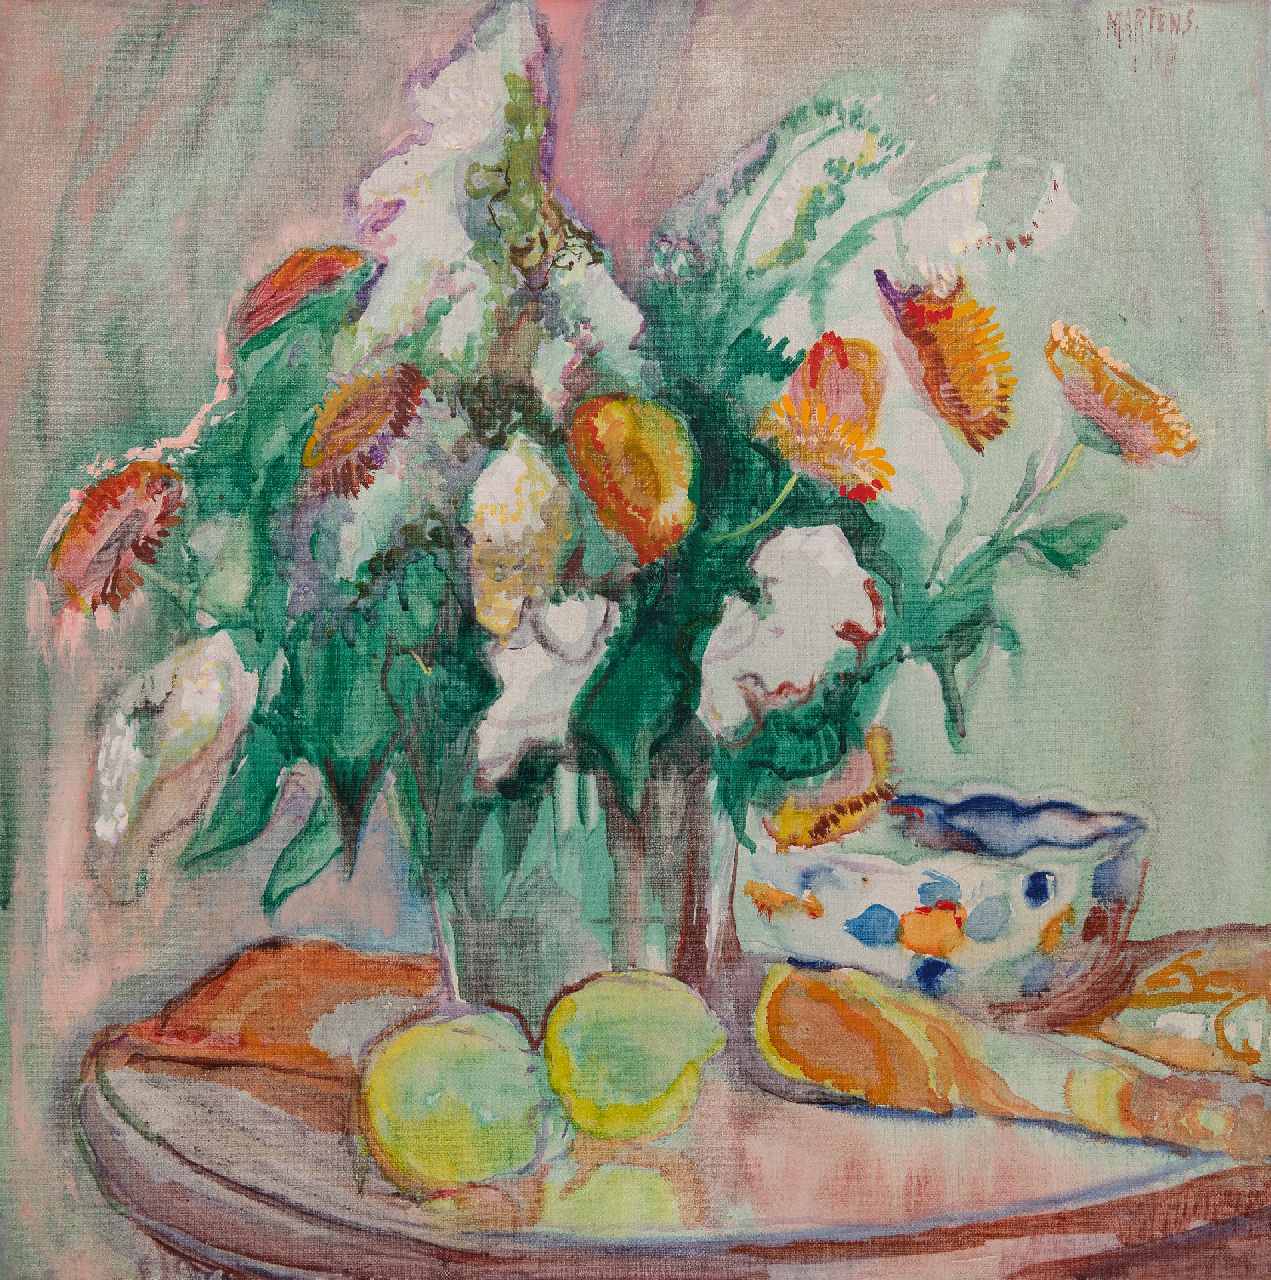 Martens G.G.  | Gijsbert 'George' Martens | Paintings offered for sale | Flower still life with lemons, benzinerel and wax paint on canvas 50.3 x 50.3 cm, signed u.r.